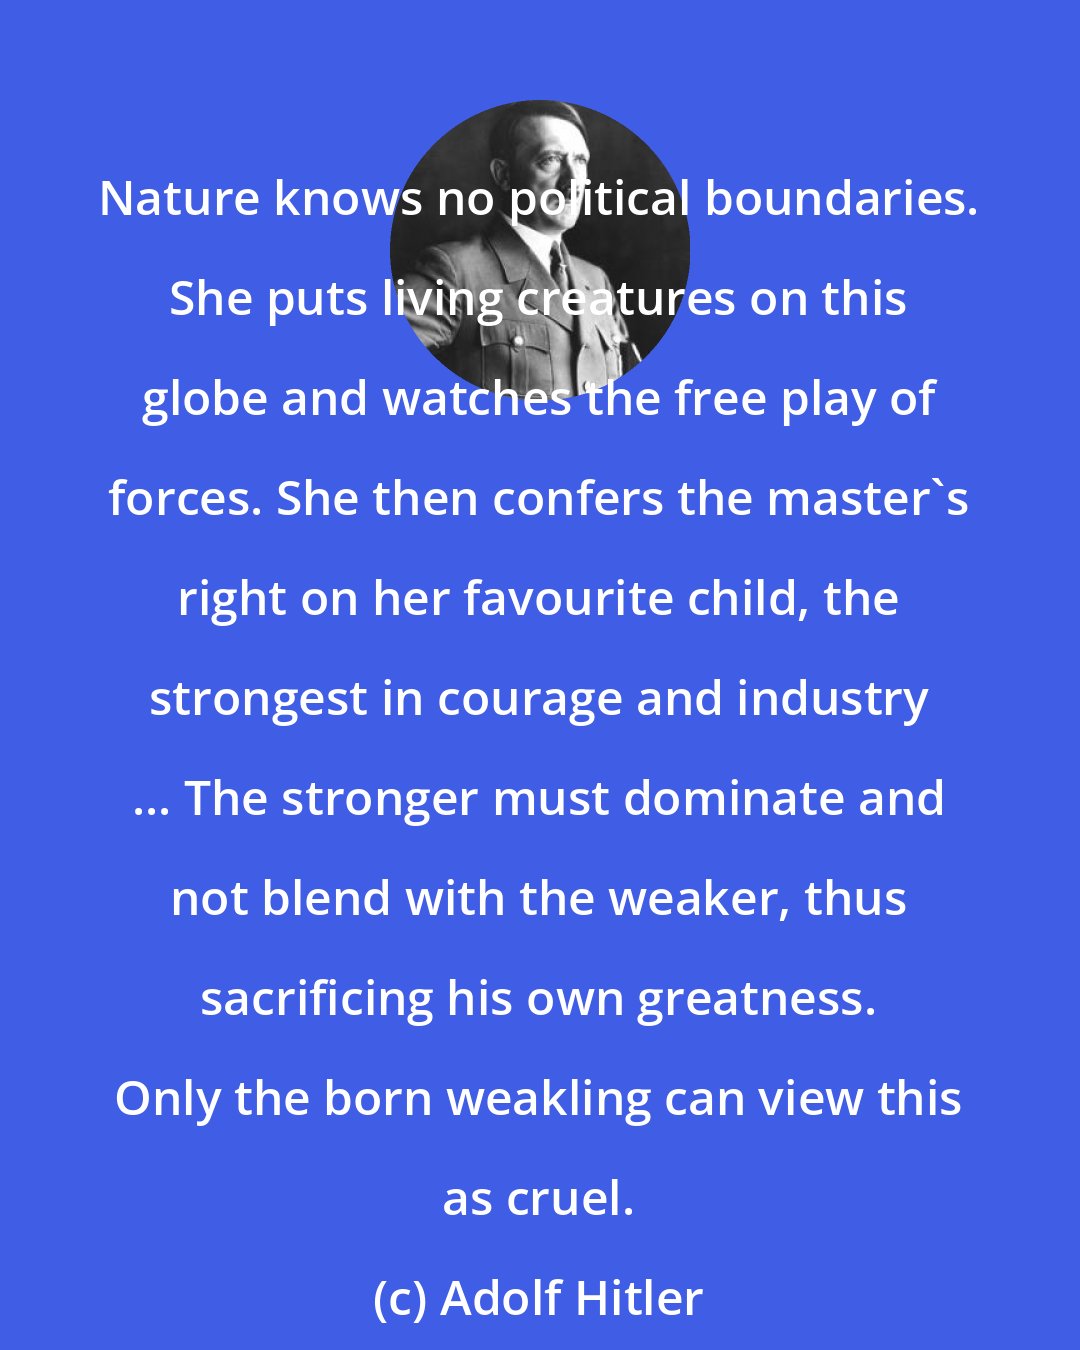 Adolf Hitler: Nature knows no political boundaries. She puts living creatures on this globe and watches the free play of forces. She then confers the master's right on her favourite child, the strongest in courage and industry ... The stronger must dominate and not blend with the weaker, thus sacrificing his own greatness. Only the born weakling can view this as cruel.